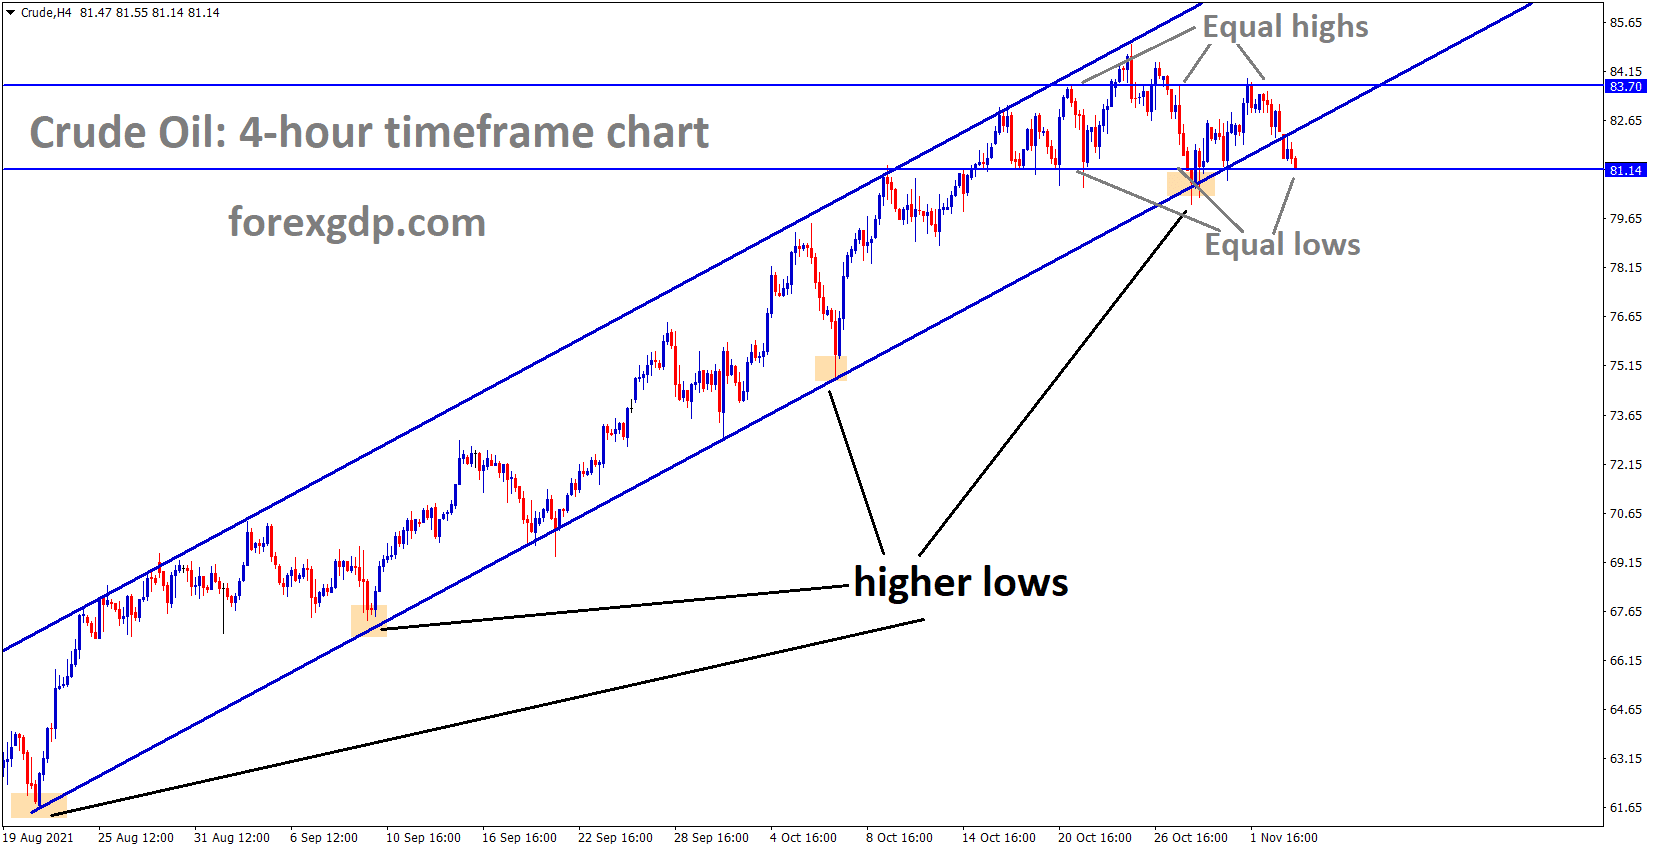 Crude oil is moving in the Ascending channel and consolidated